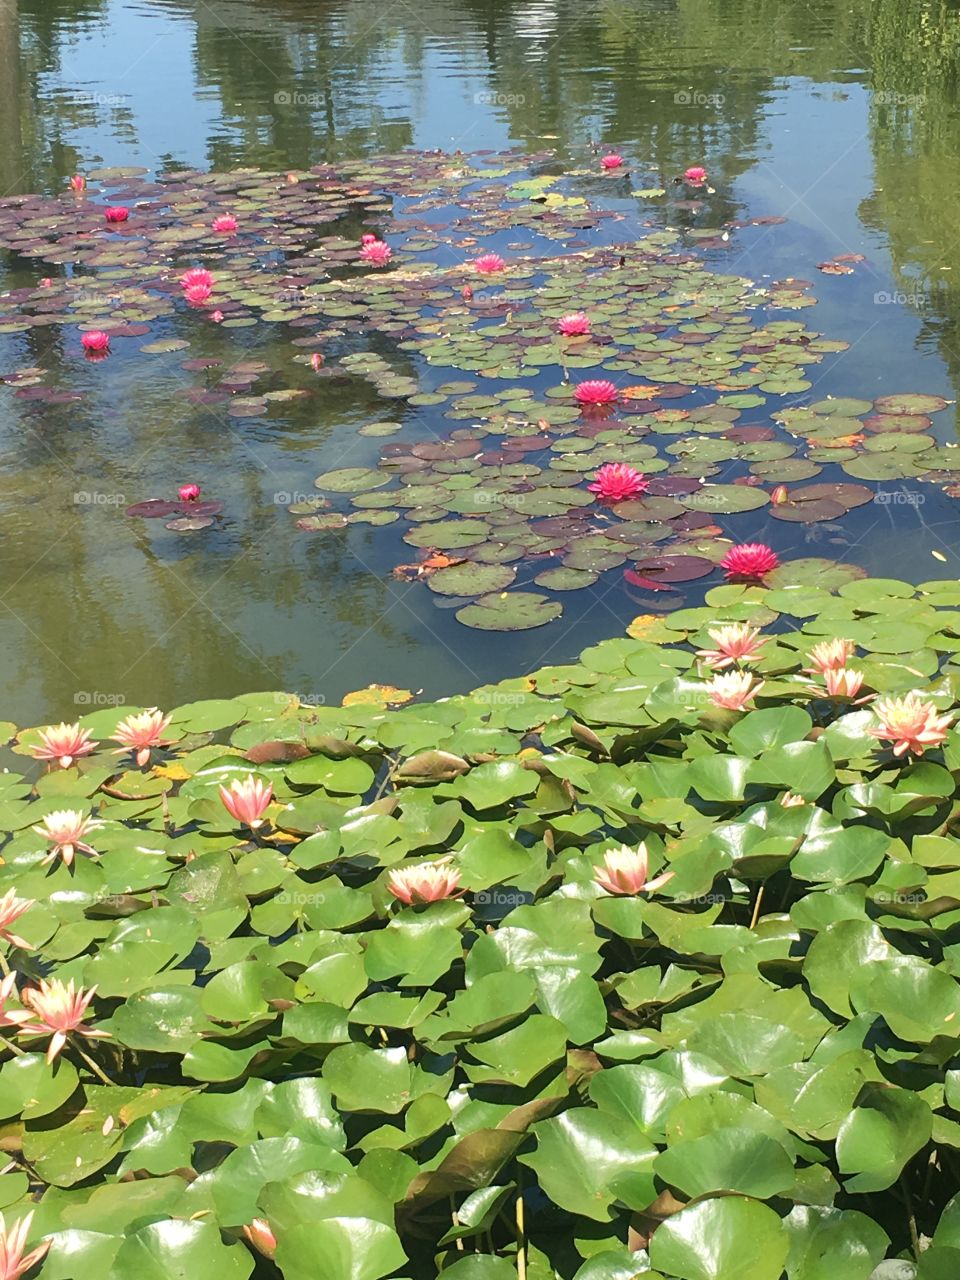 A bed of water lilies in a glassy pond. 